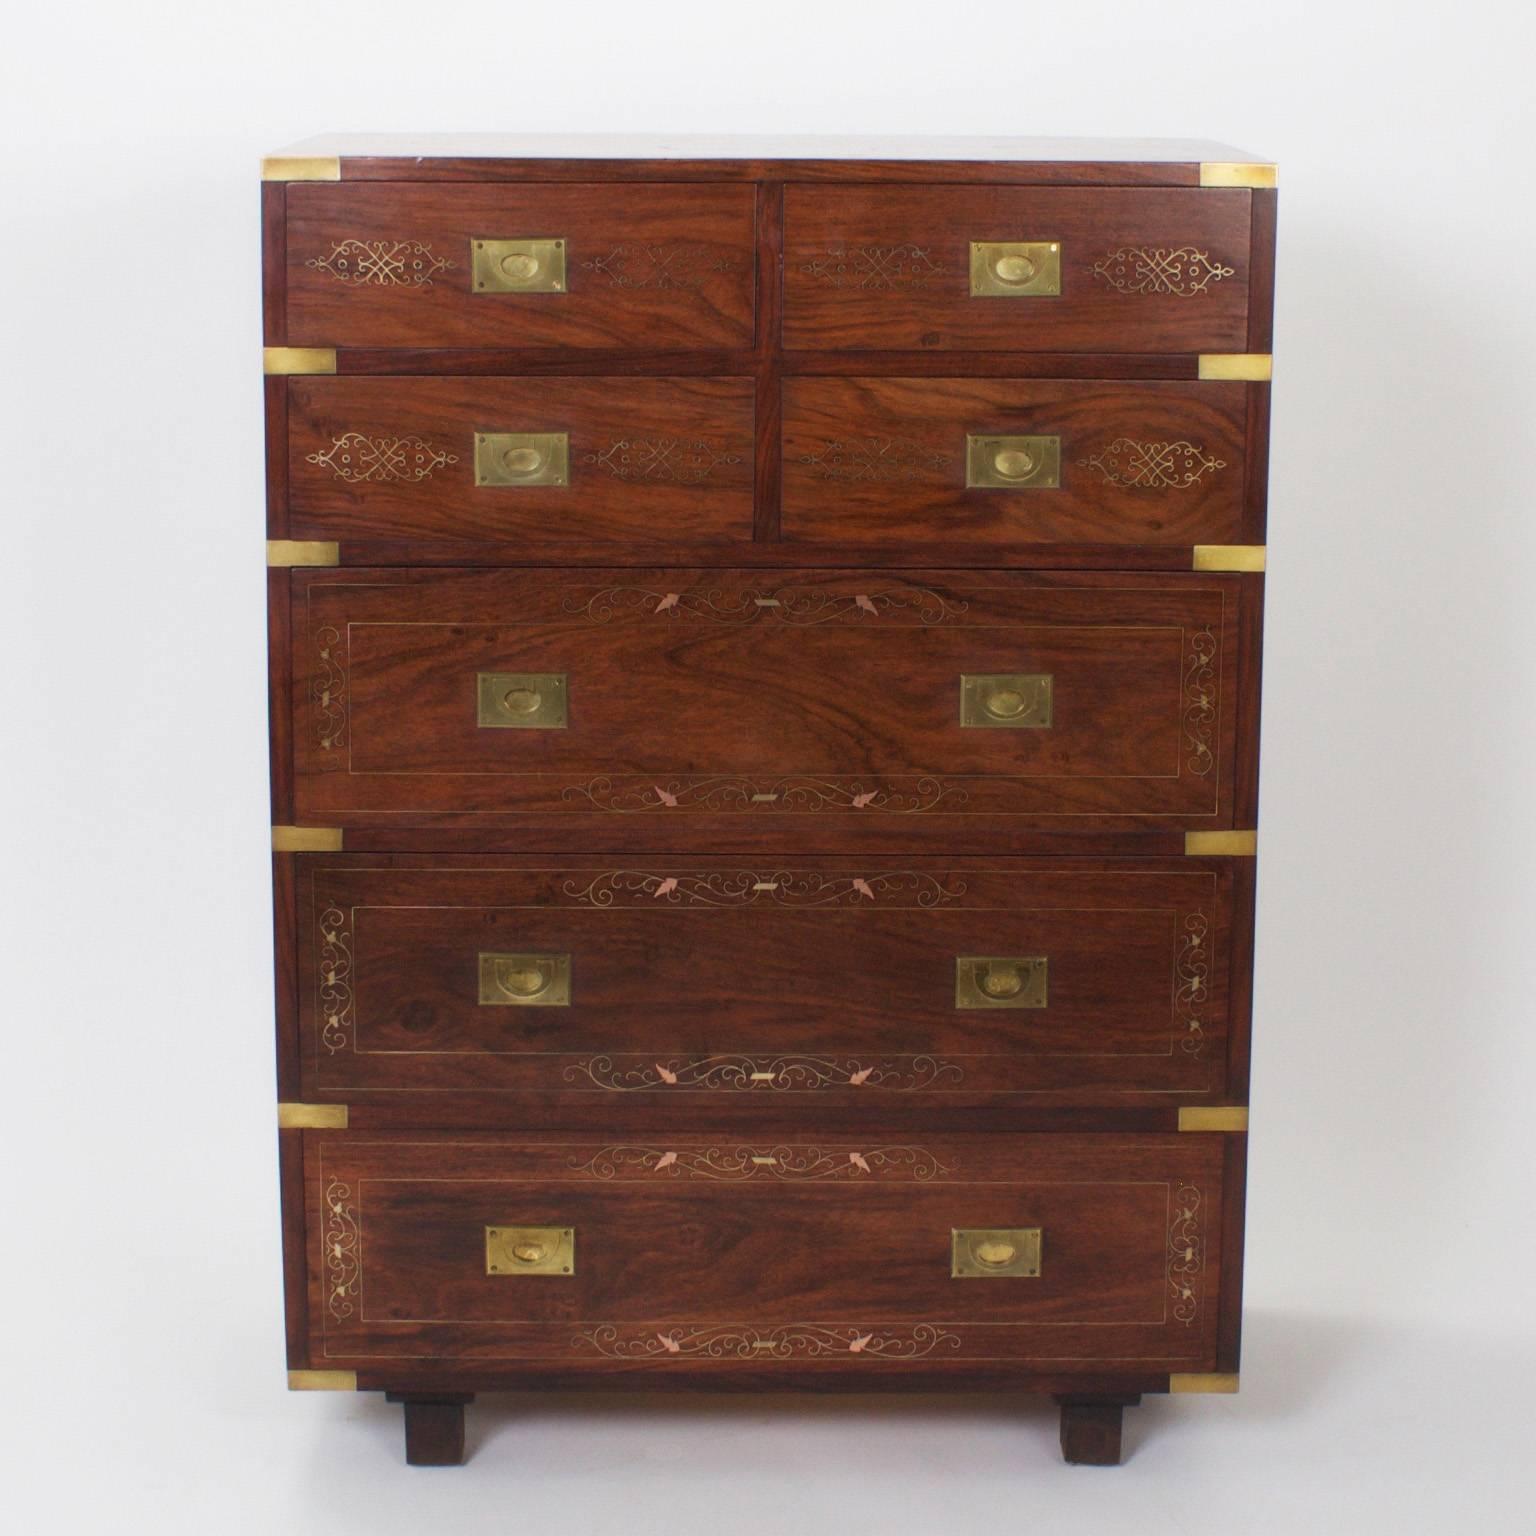 Handsome antique Anglo Indian campaign chest of drawers that stands aside from the typical. Crafted with beautifully grained mahogany and decorated with elegant brass and copper inlays. The brass hardware is campaign style, the sides are paneled,